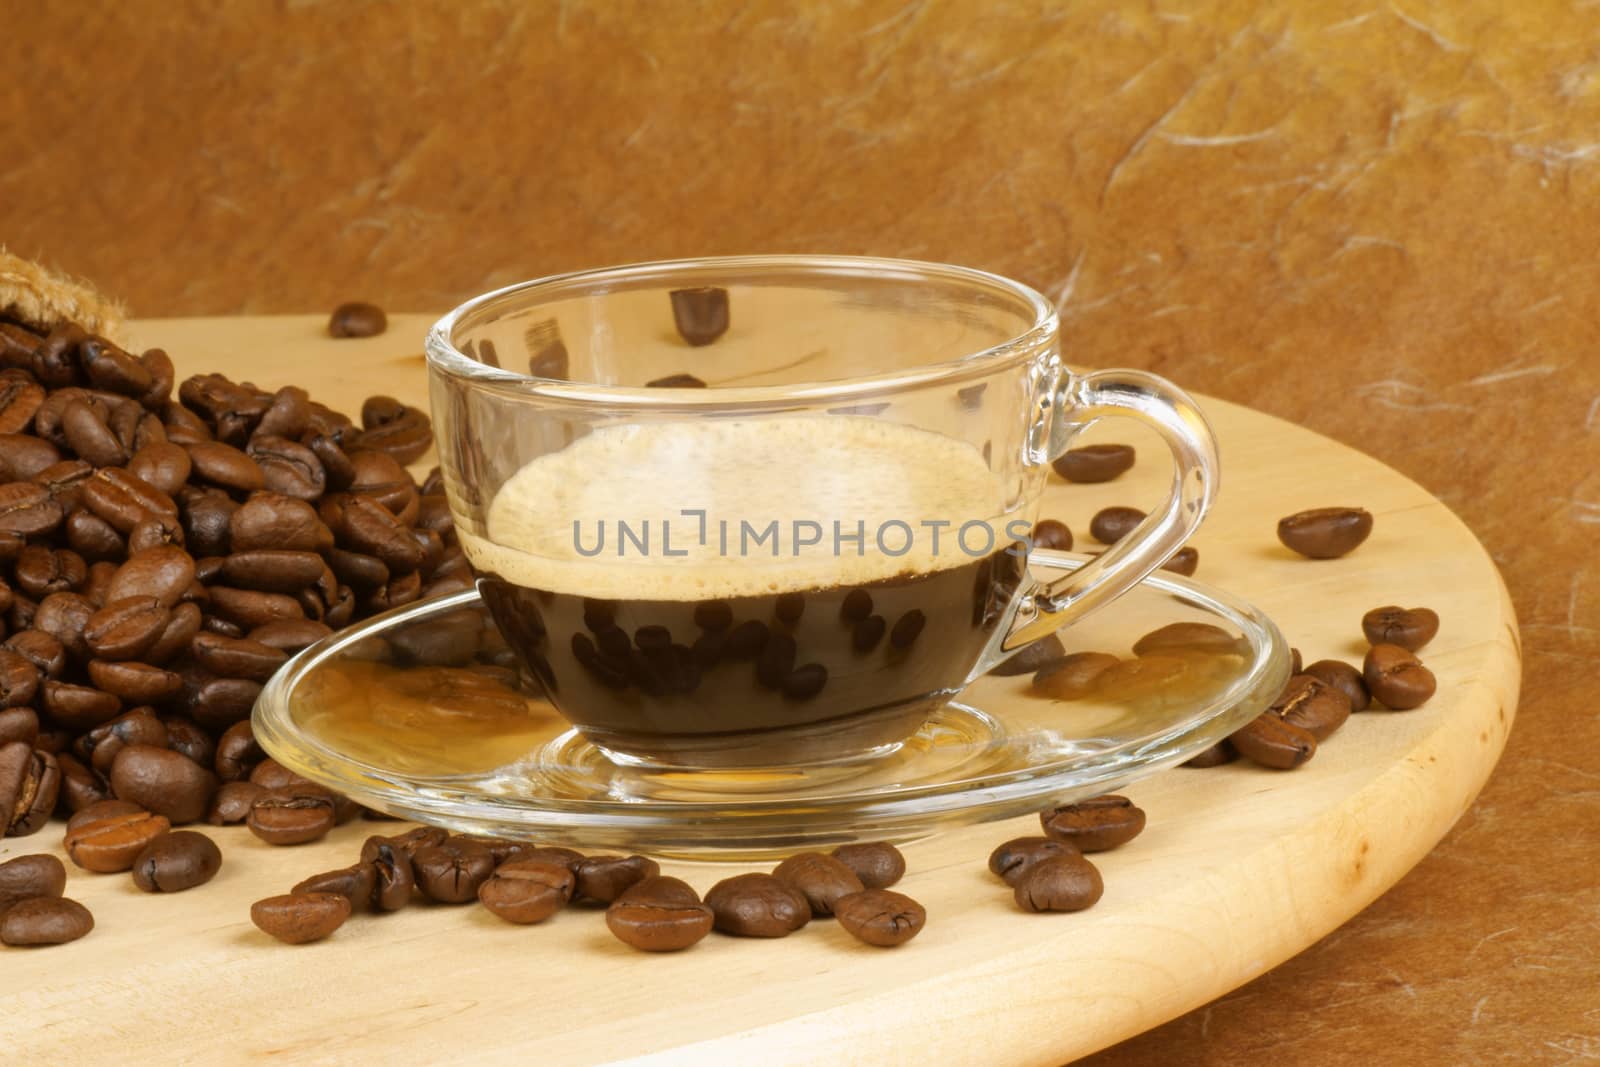 Close-up of a glass cup with italian espresso over a wooden table, surrounded by coffee beans.